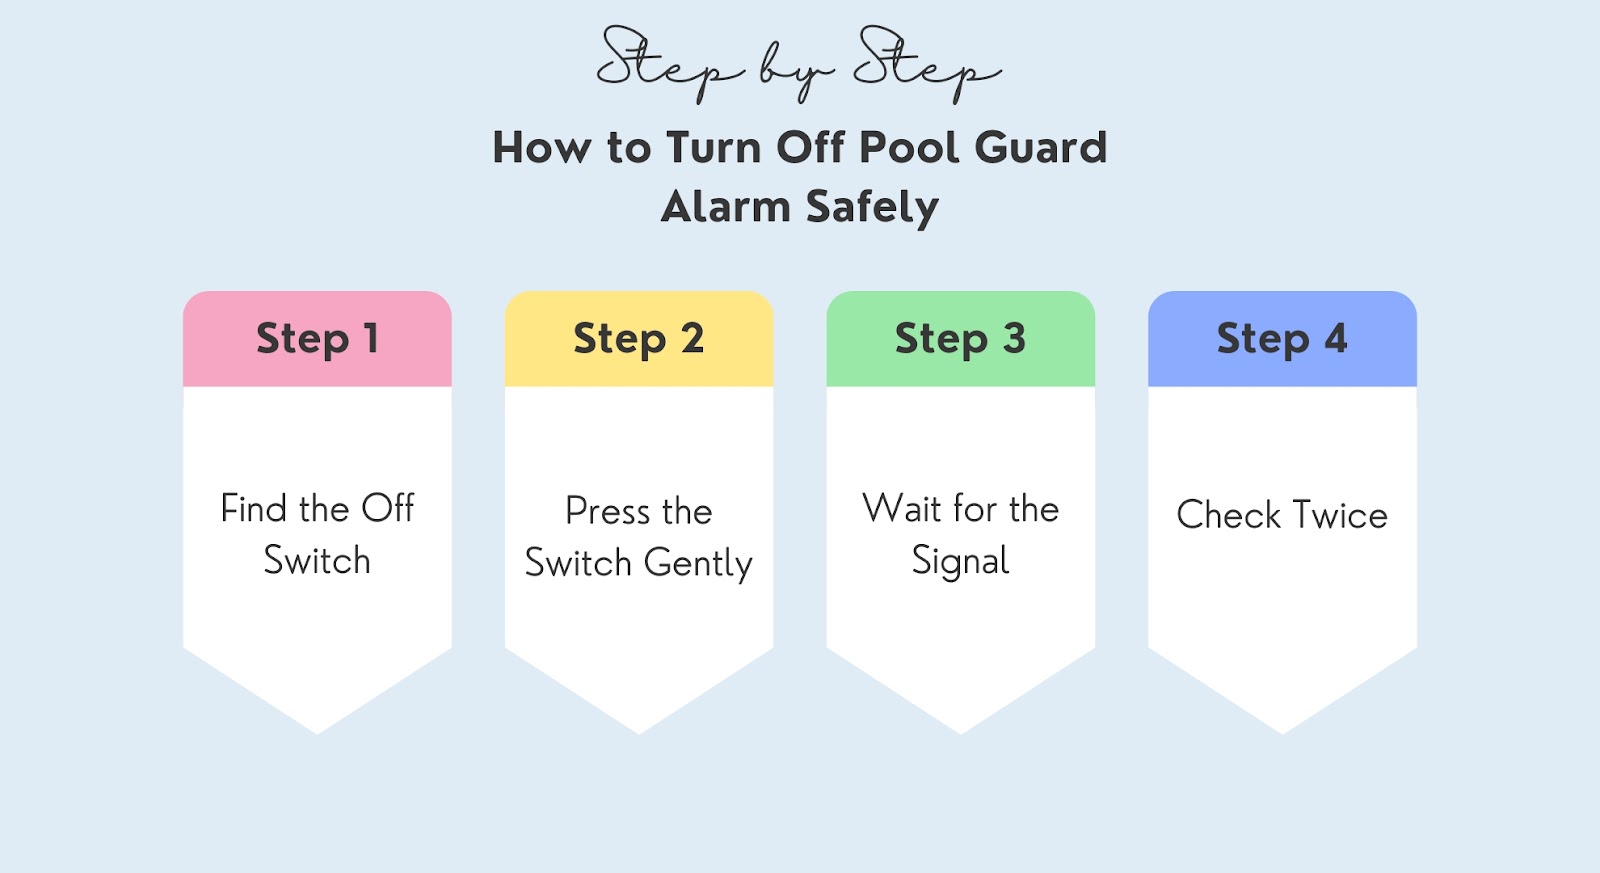 How to Turn Off Pool Guard Alarm Safely